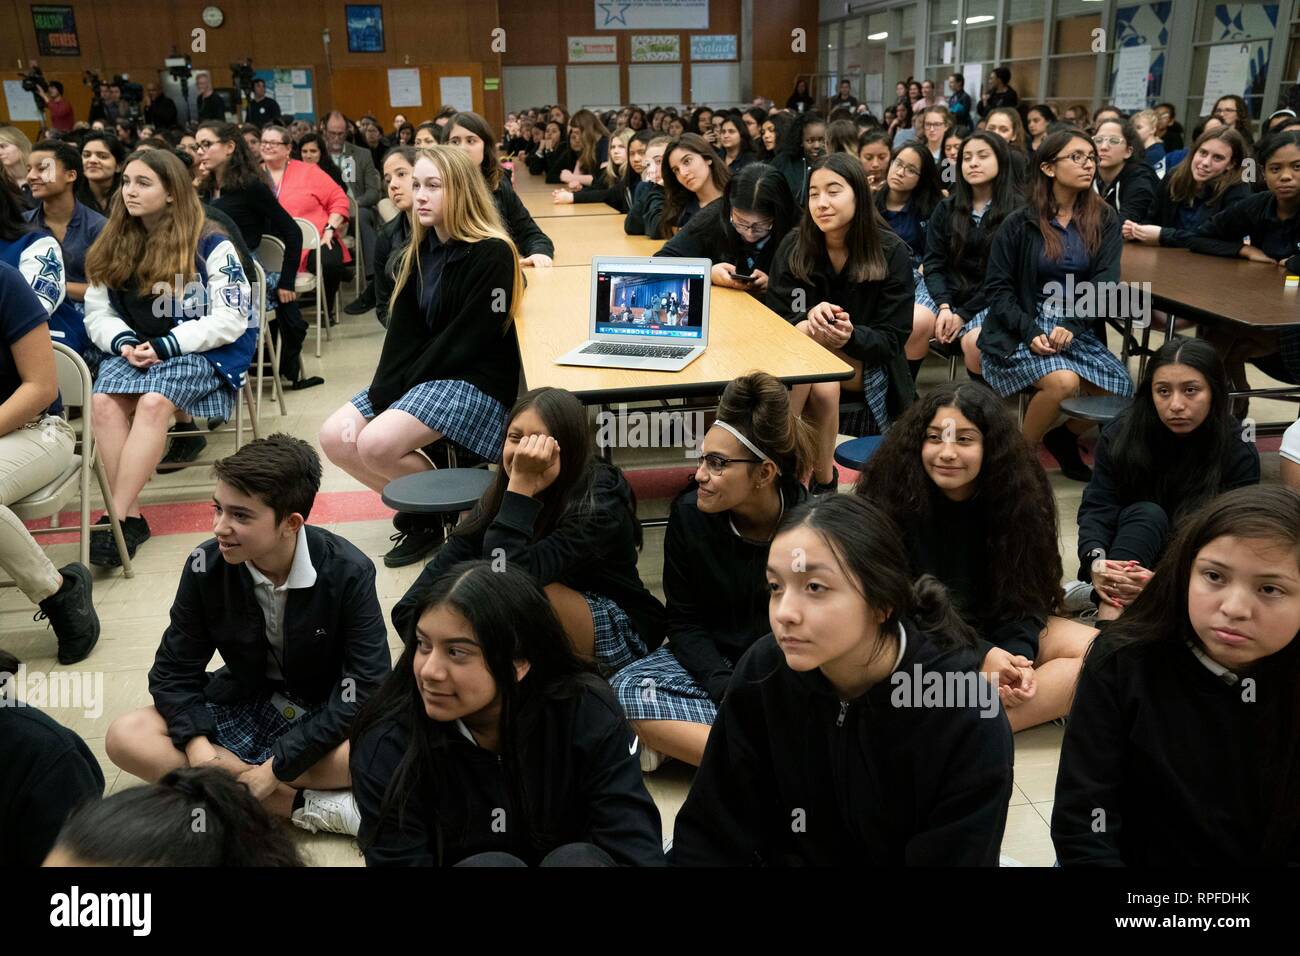 Students at  the Ann Richards School for Young Women Leaders listen to a talk by United States Senator Kirsten Gillibrand, a Democrat from New York, during an assembly at the school in Austin. Gillibrand, 52, announced her bid for the 2020 Democratic presidential nomination in January 2019. Stock Photo